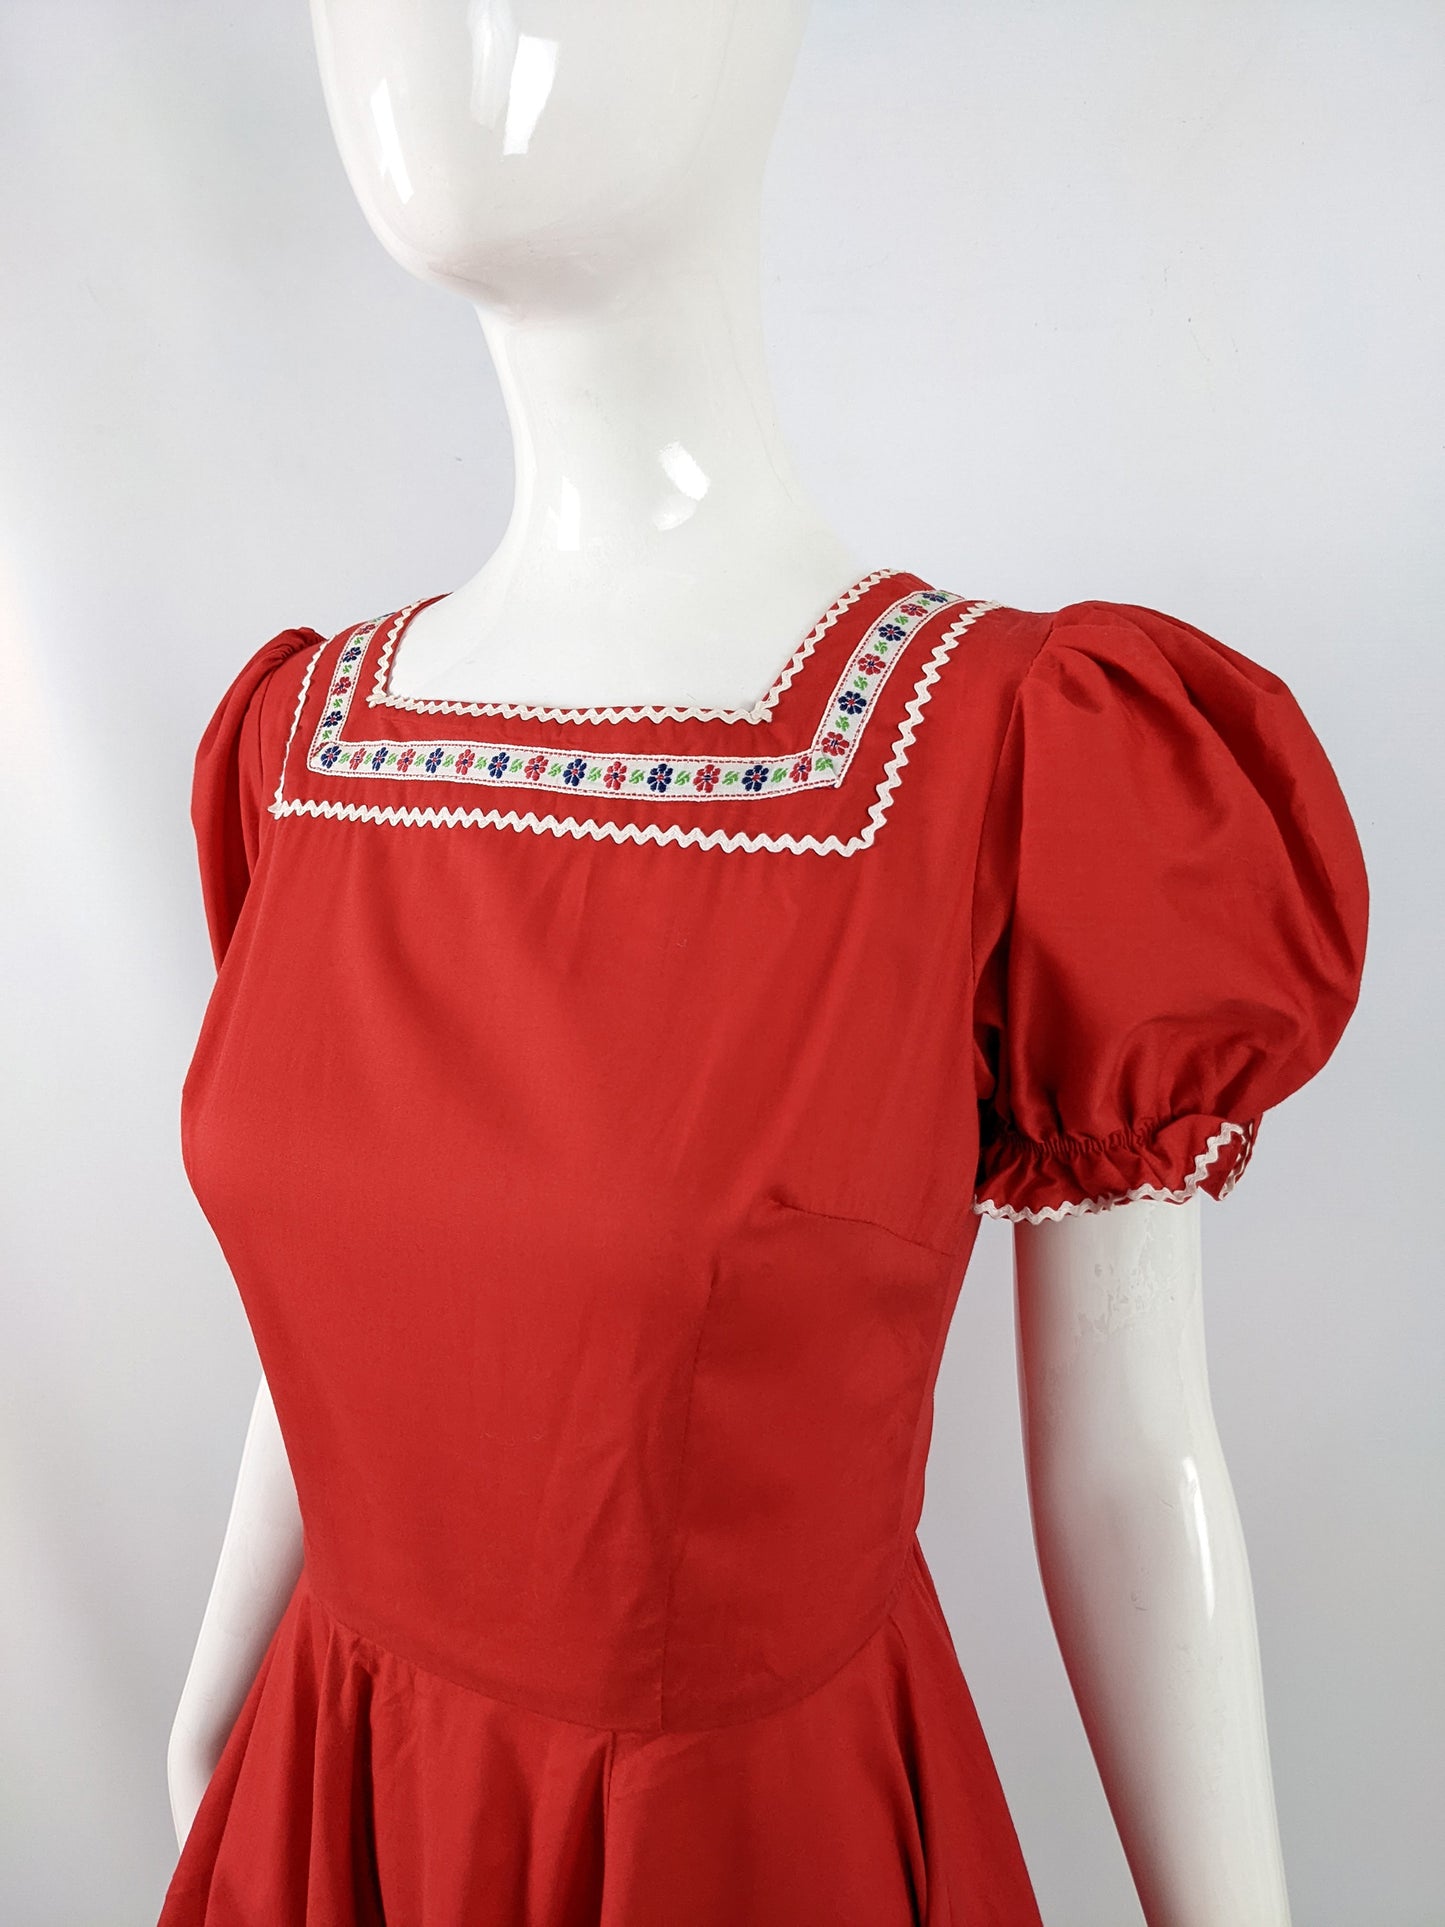 Vintage Red Full Skirt Puffed Sleeve 50s Style Patio Dress, 1970s